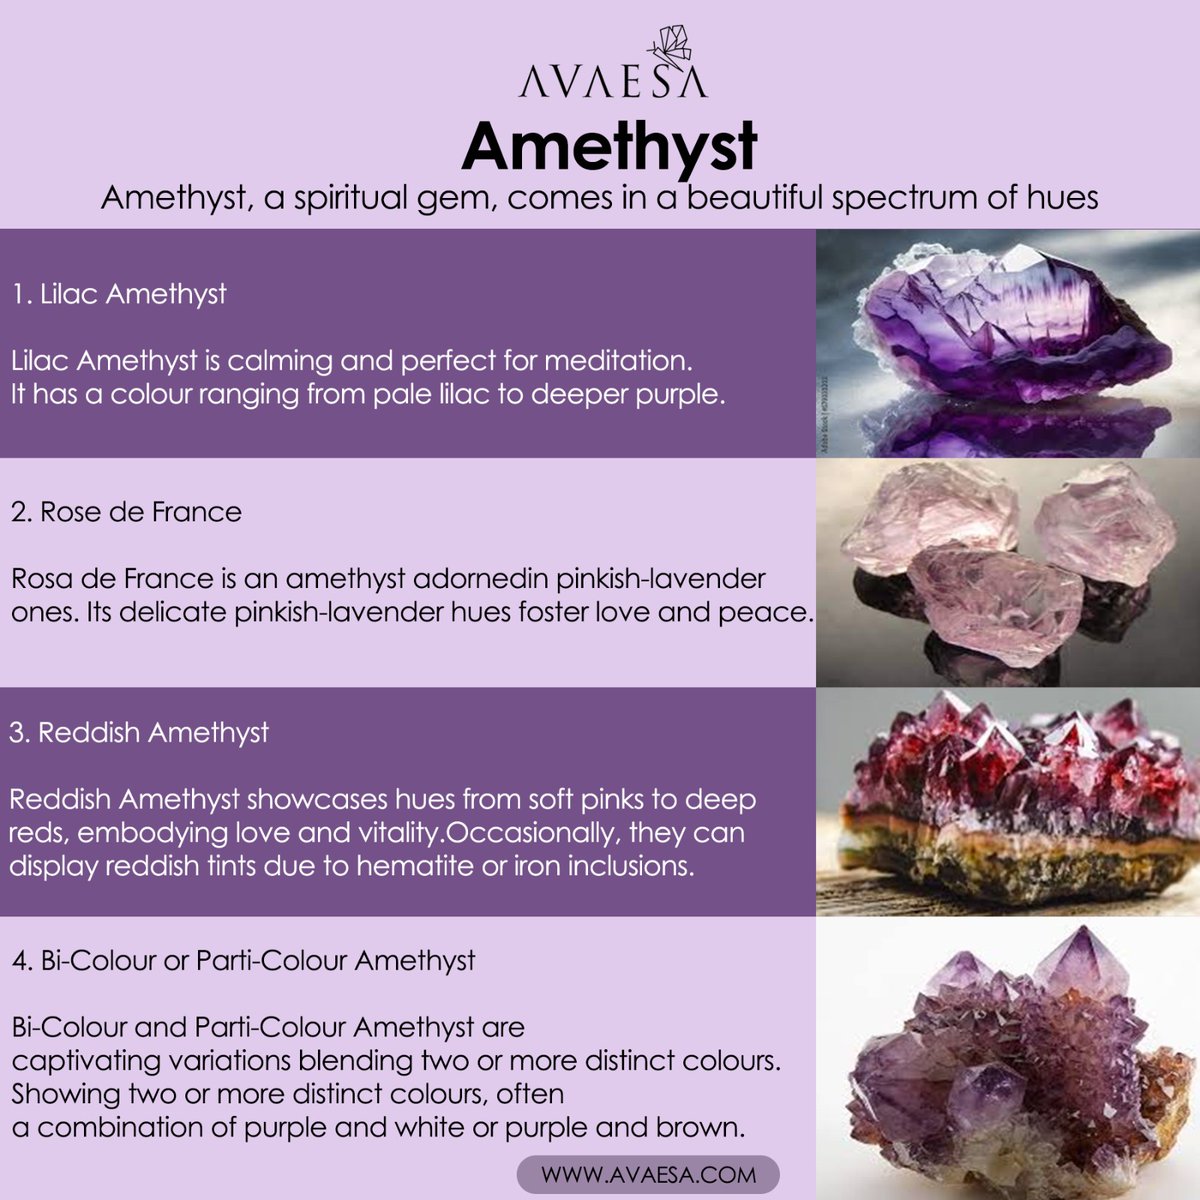 Discover the calming lilacs and gentle pinks of Amethyst.
#amethyst #amethystlove #amethystlover #crystallove #crystalcolor #gemstonelover #gemstonecolour #crystalmagic #CrystalColors #amethystpurple